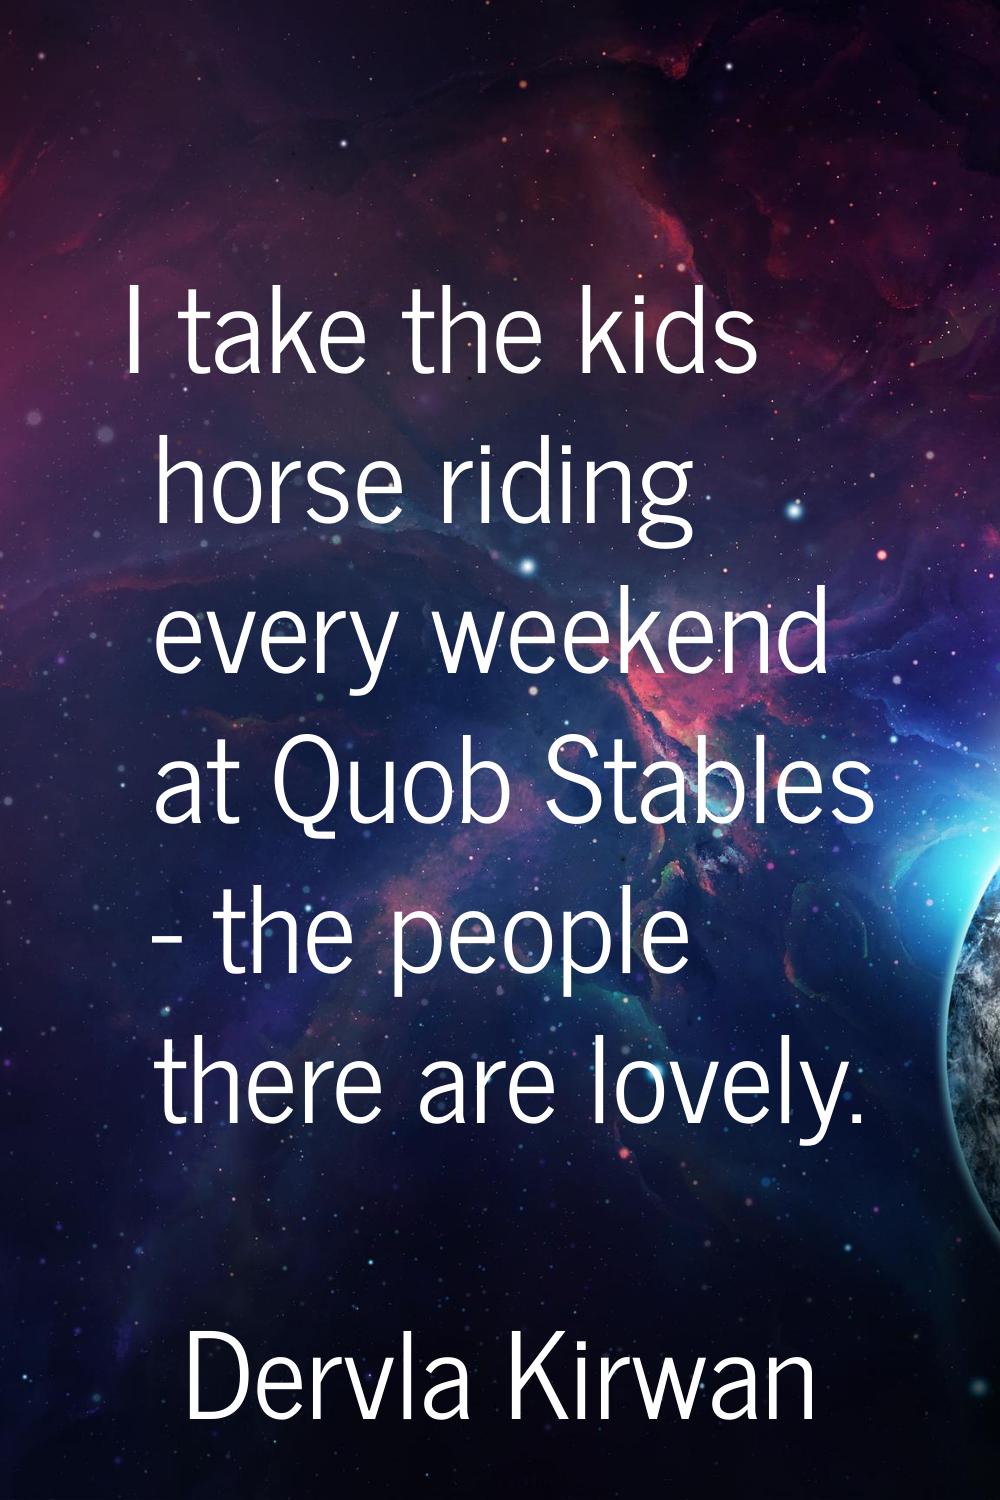 I take the kids horse riding every weekend at Quob Stables - the people there are lovely.